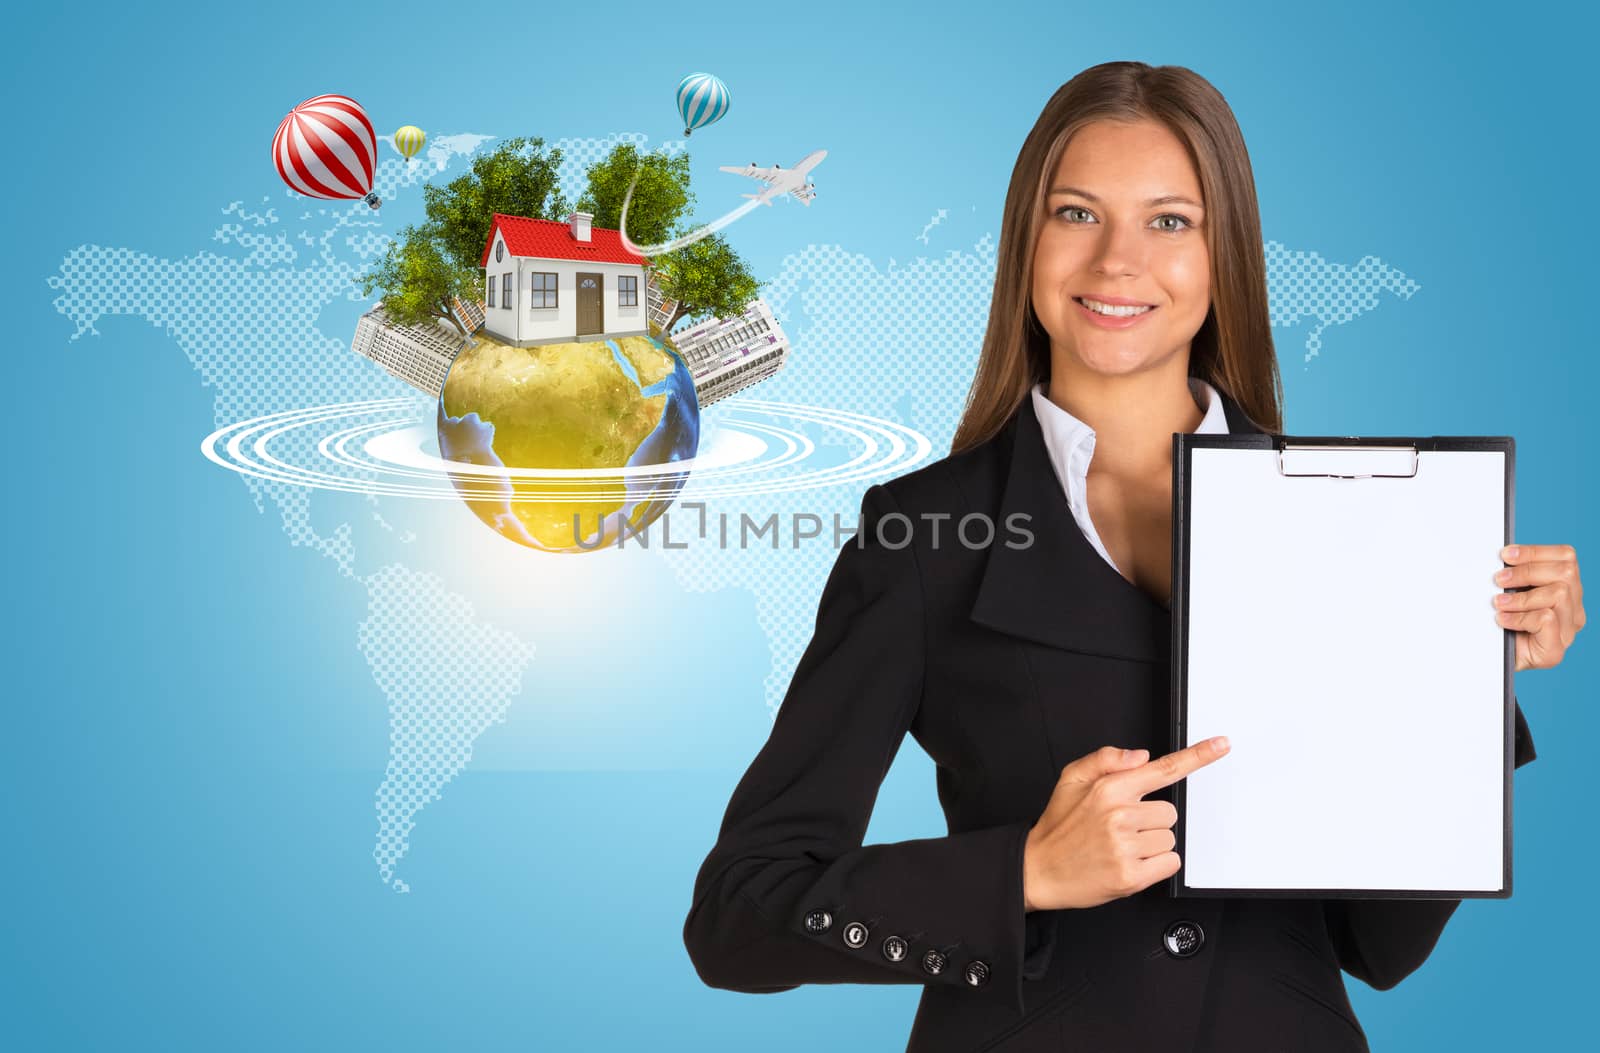 Beautiful businesswoman in suit holding paper holder. Earth with buildings and trees in background. Elements of this image furnished by NASA